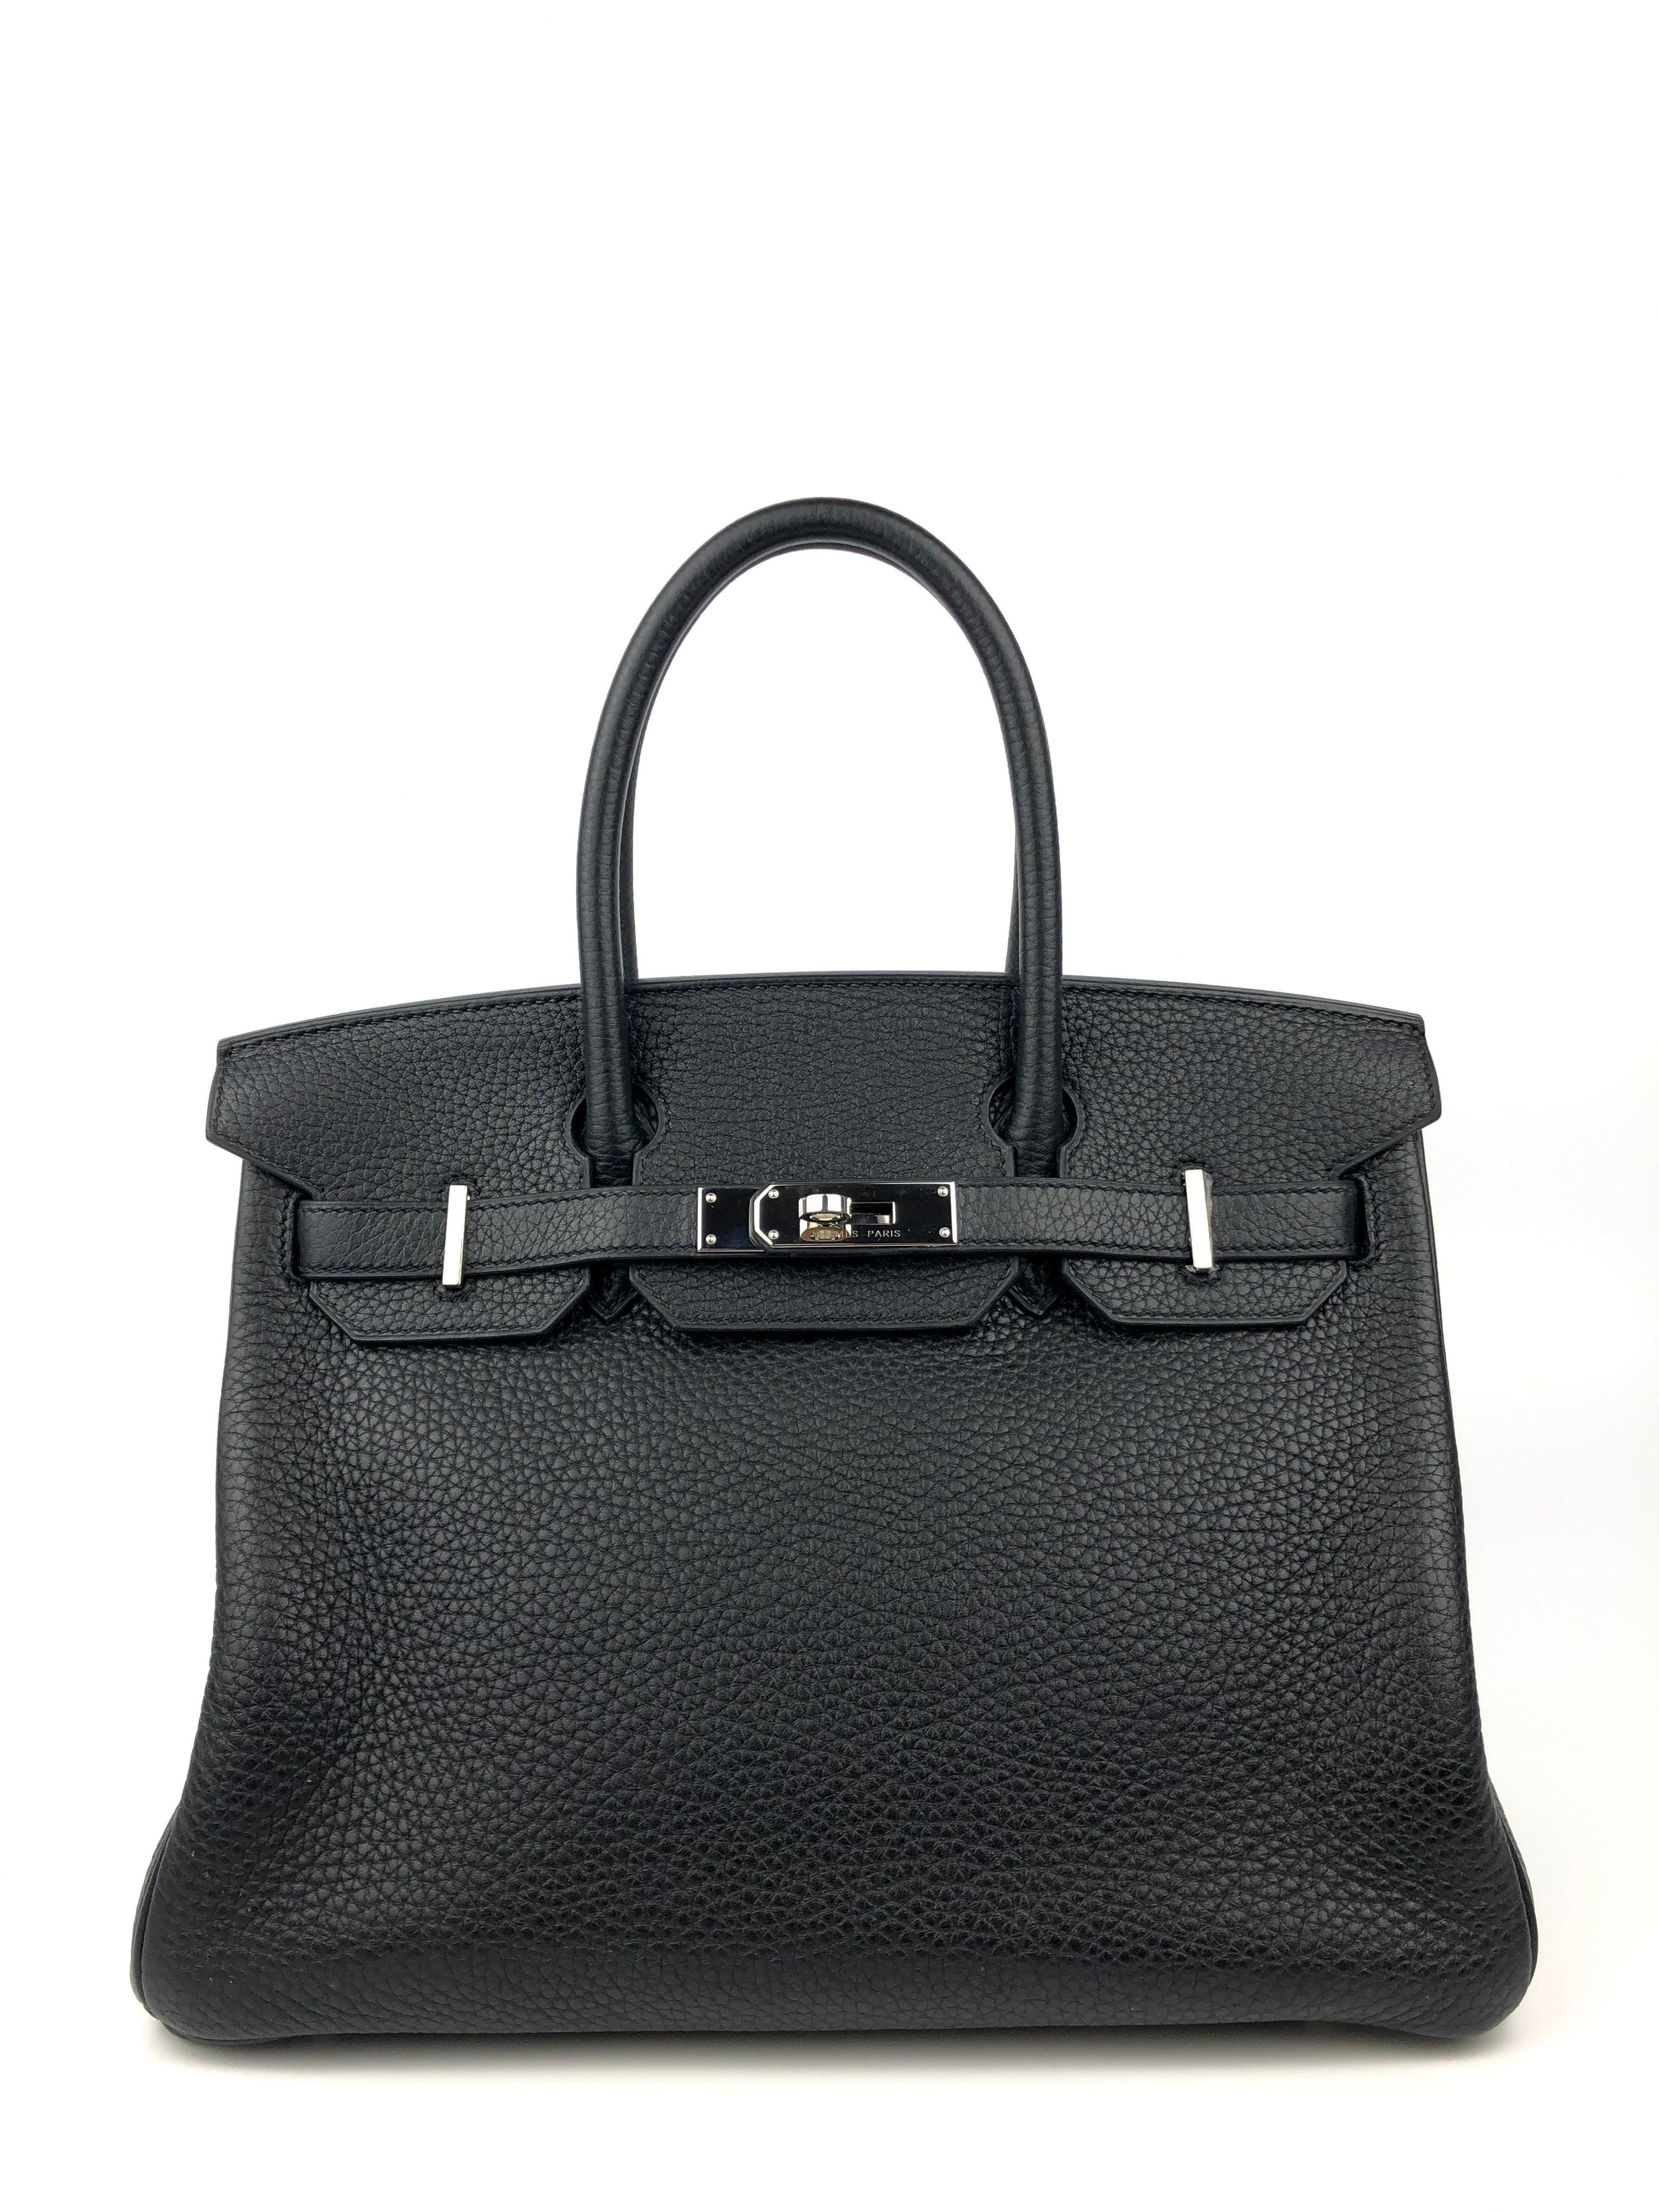 Hermes Birkin 30 Black Noir Palladium Hardware. Excellent Condition, light hairlines on hardware excellent corners and buttery structure. 

Shop with Confidence from Lux Addicts. Authenticity Guaranteed! 